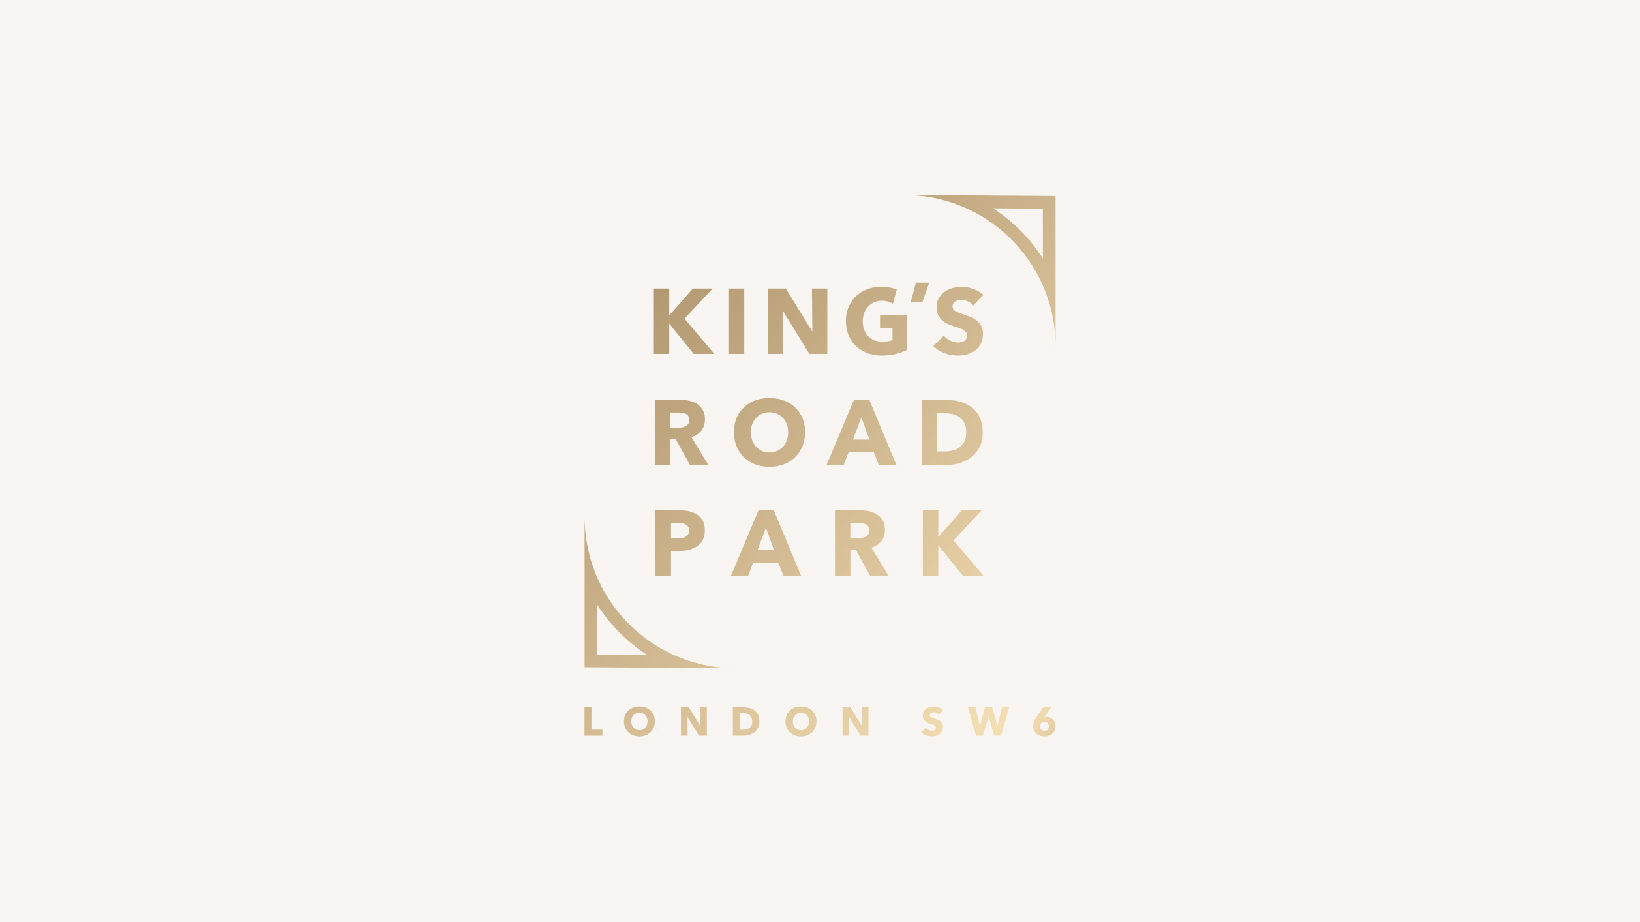 New show home now open at King's Road Park